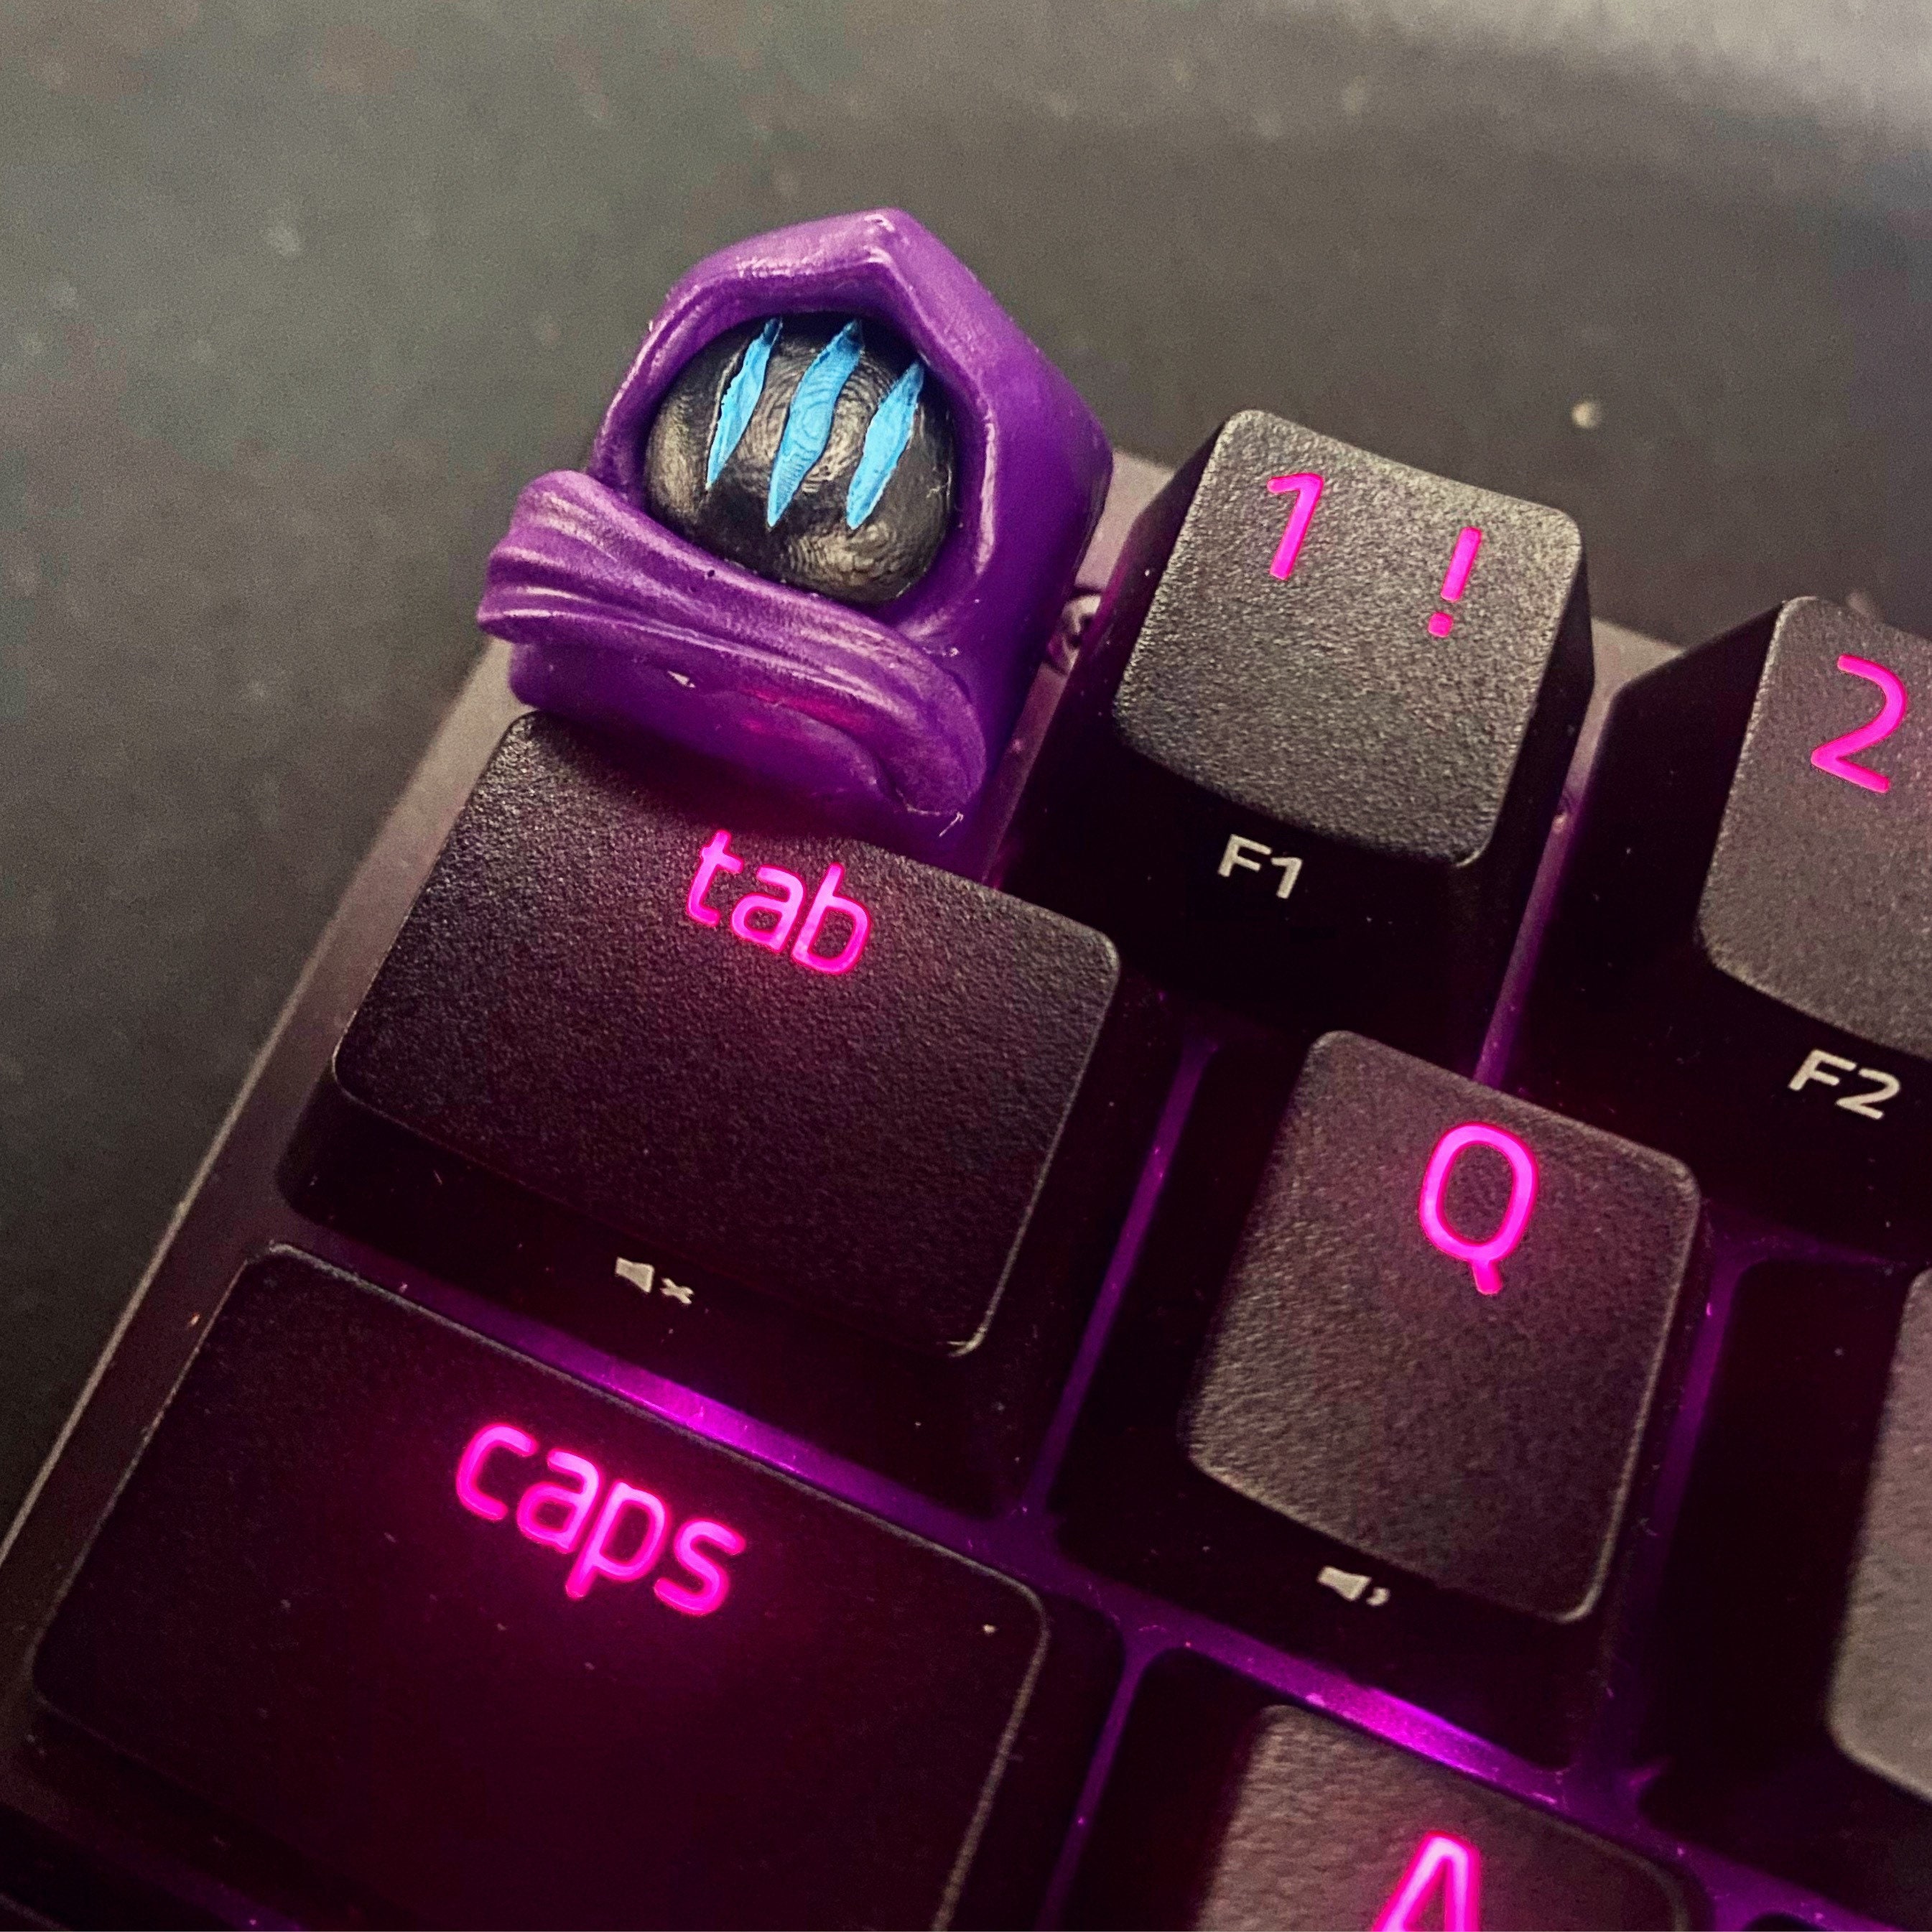 Valorant Custom Keycaps (Agent Cypher) - Laser Engraved with Each Valorant  Agent's Portrait, Skills, and Position. Fit with Any Mechanical Keyboard.